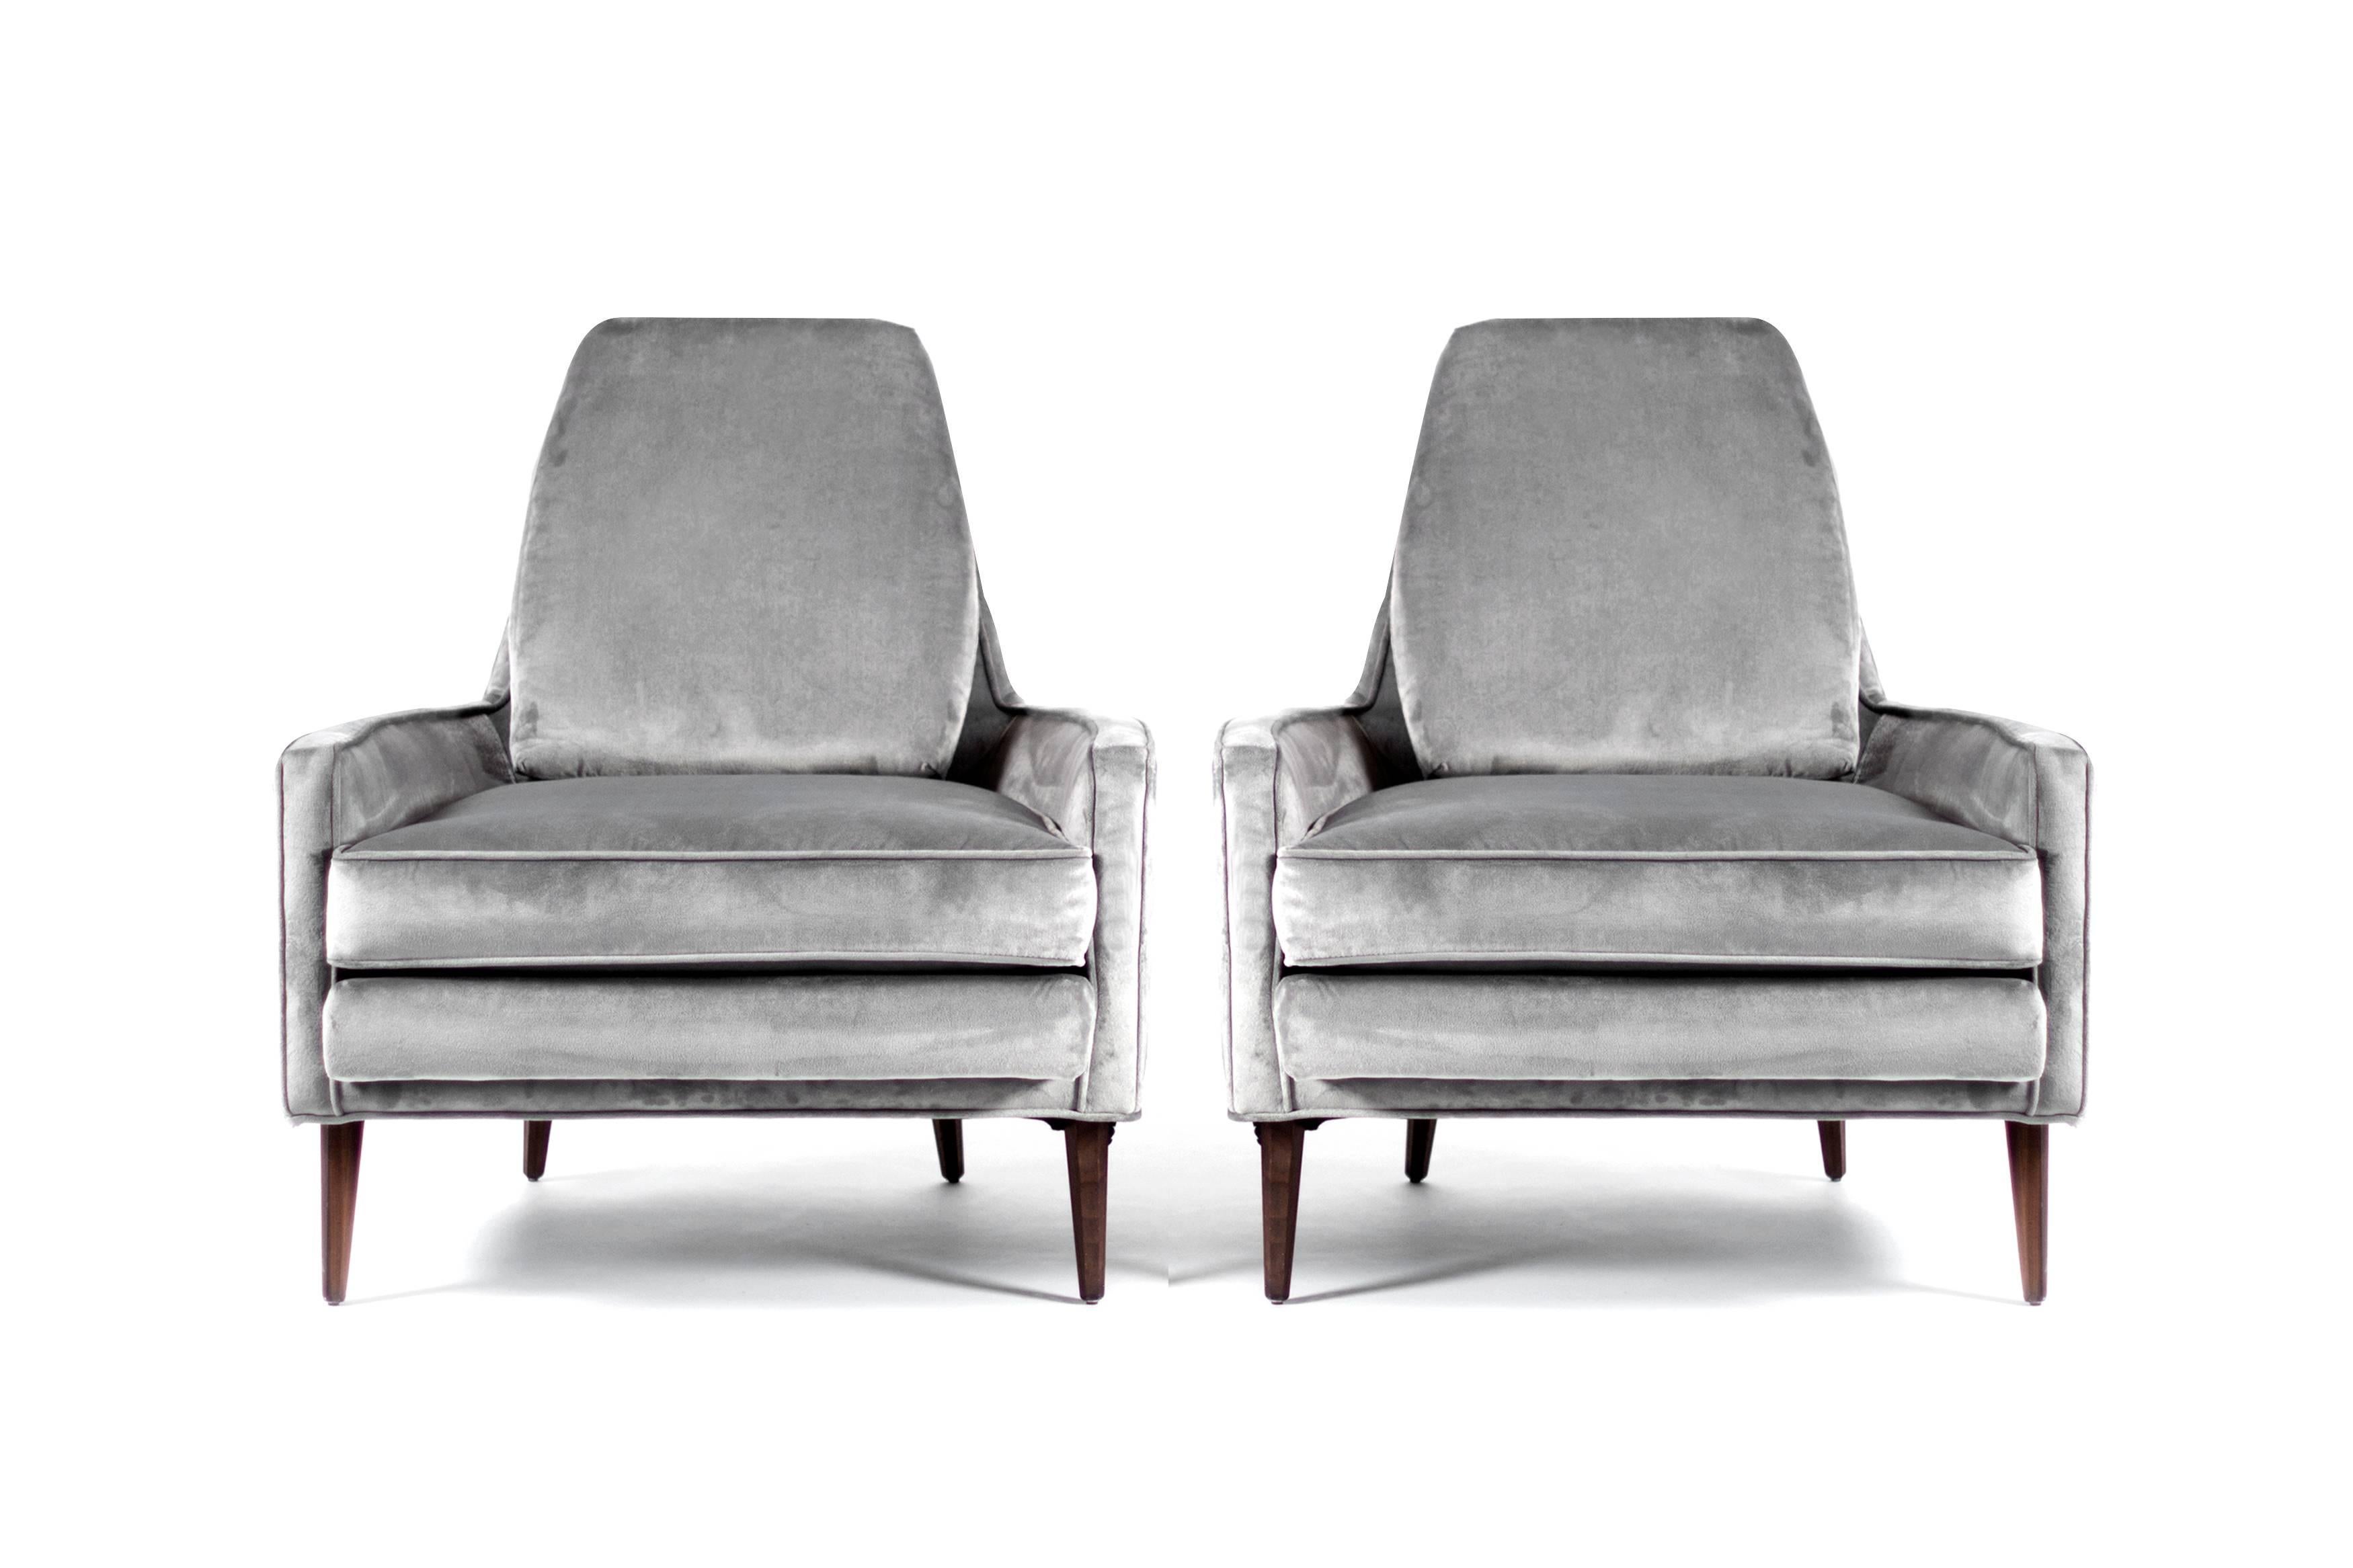 Pair of lounge chairs in the manner of Paul McCobb, newly upholstered in grey velvet.